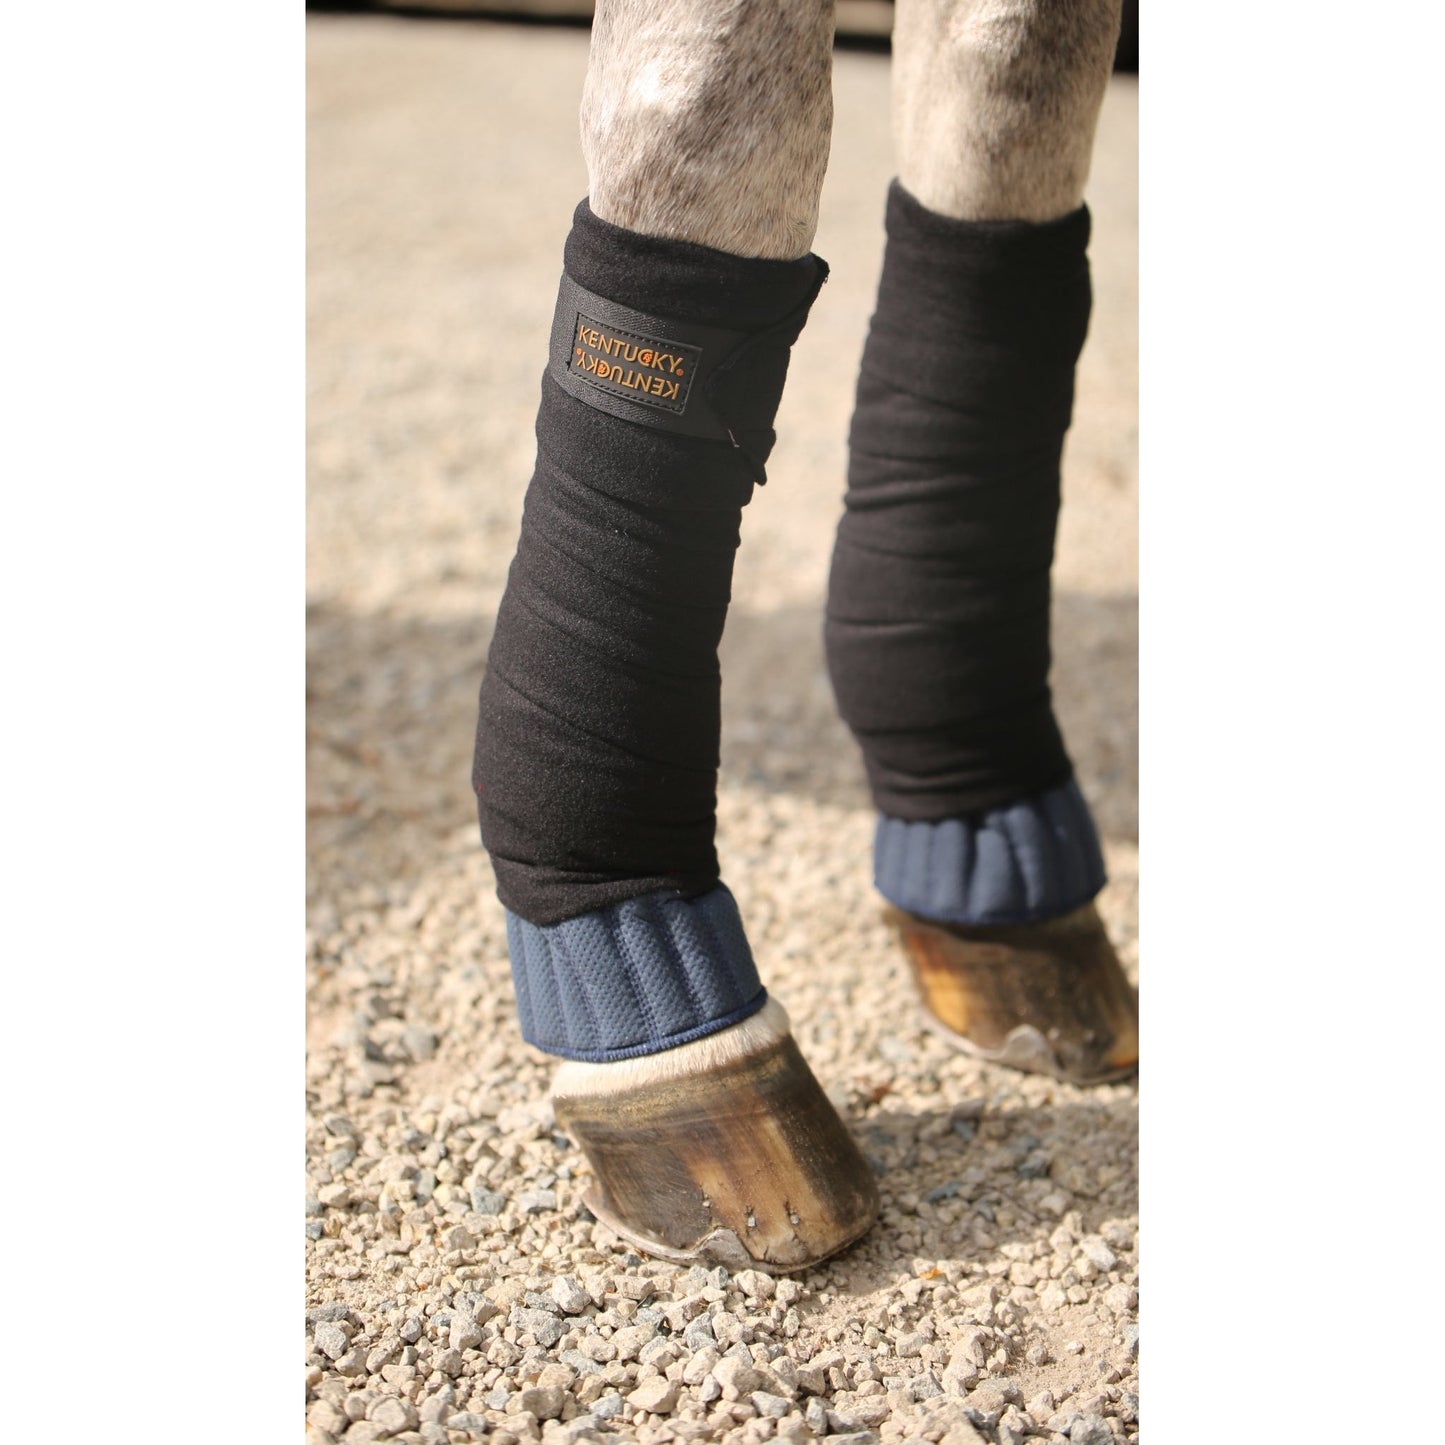 Kentucky Working Bandage Pads Absorb - 45cm x 40cm-Trailrace Equestrian Outfitters-The Equestrian